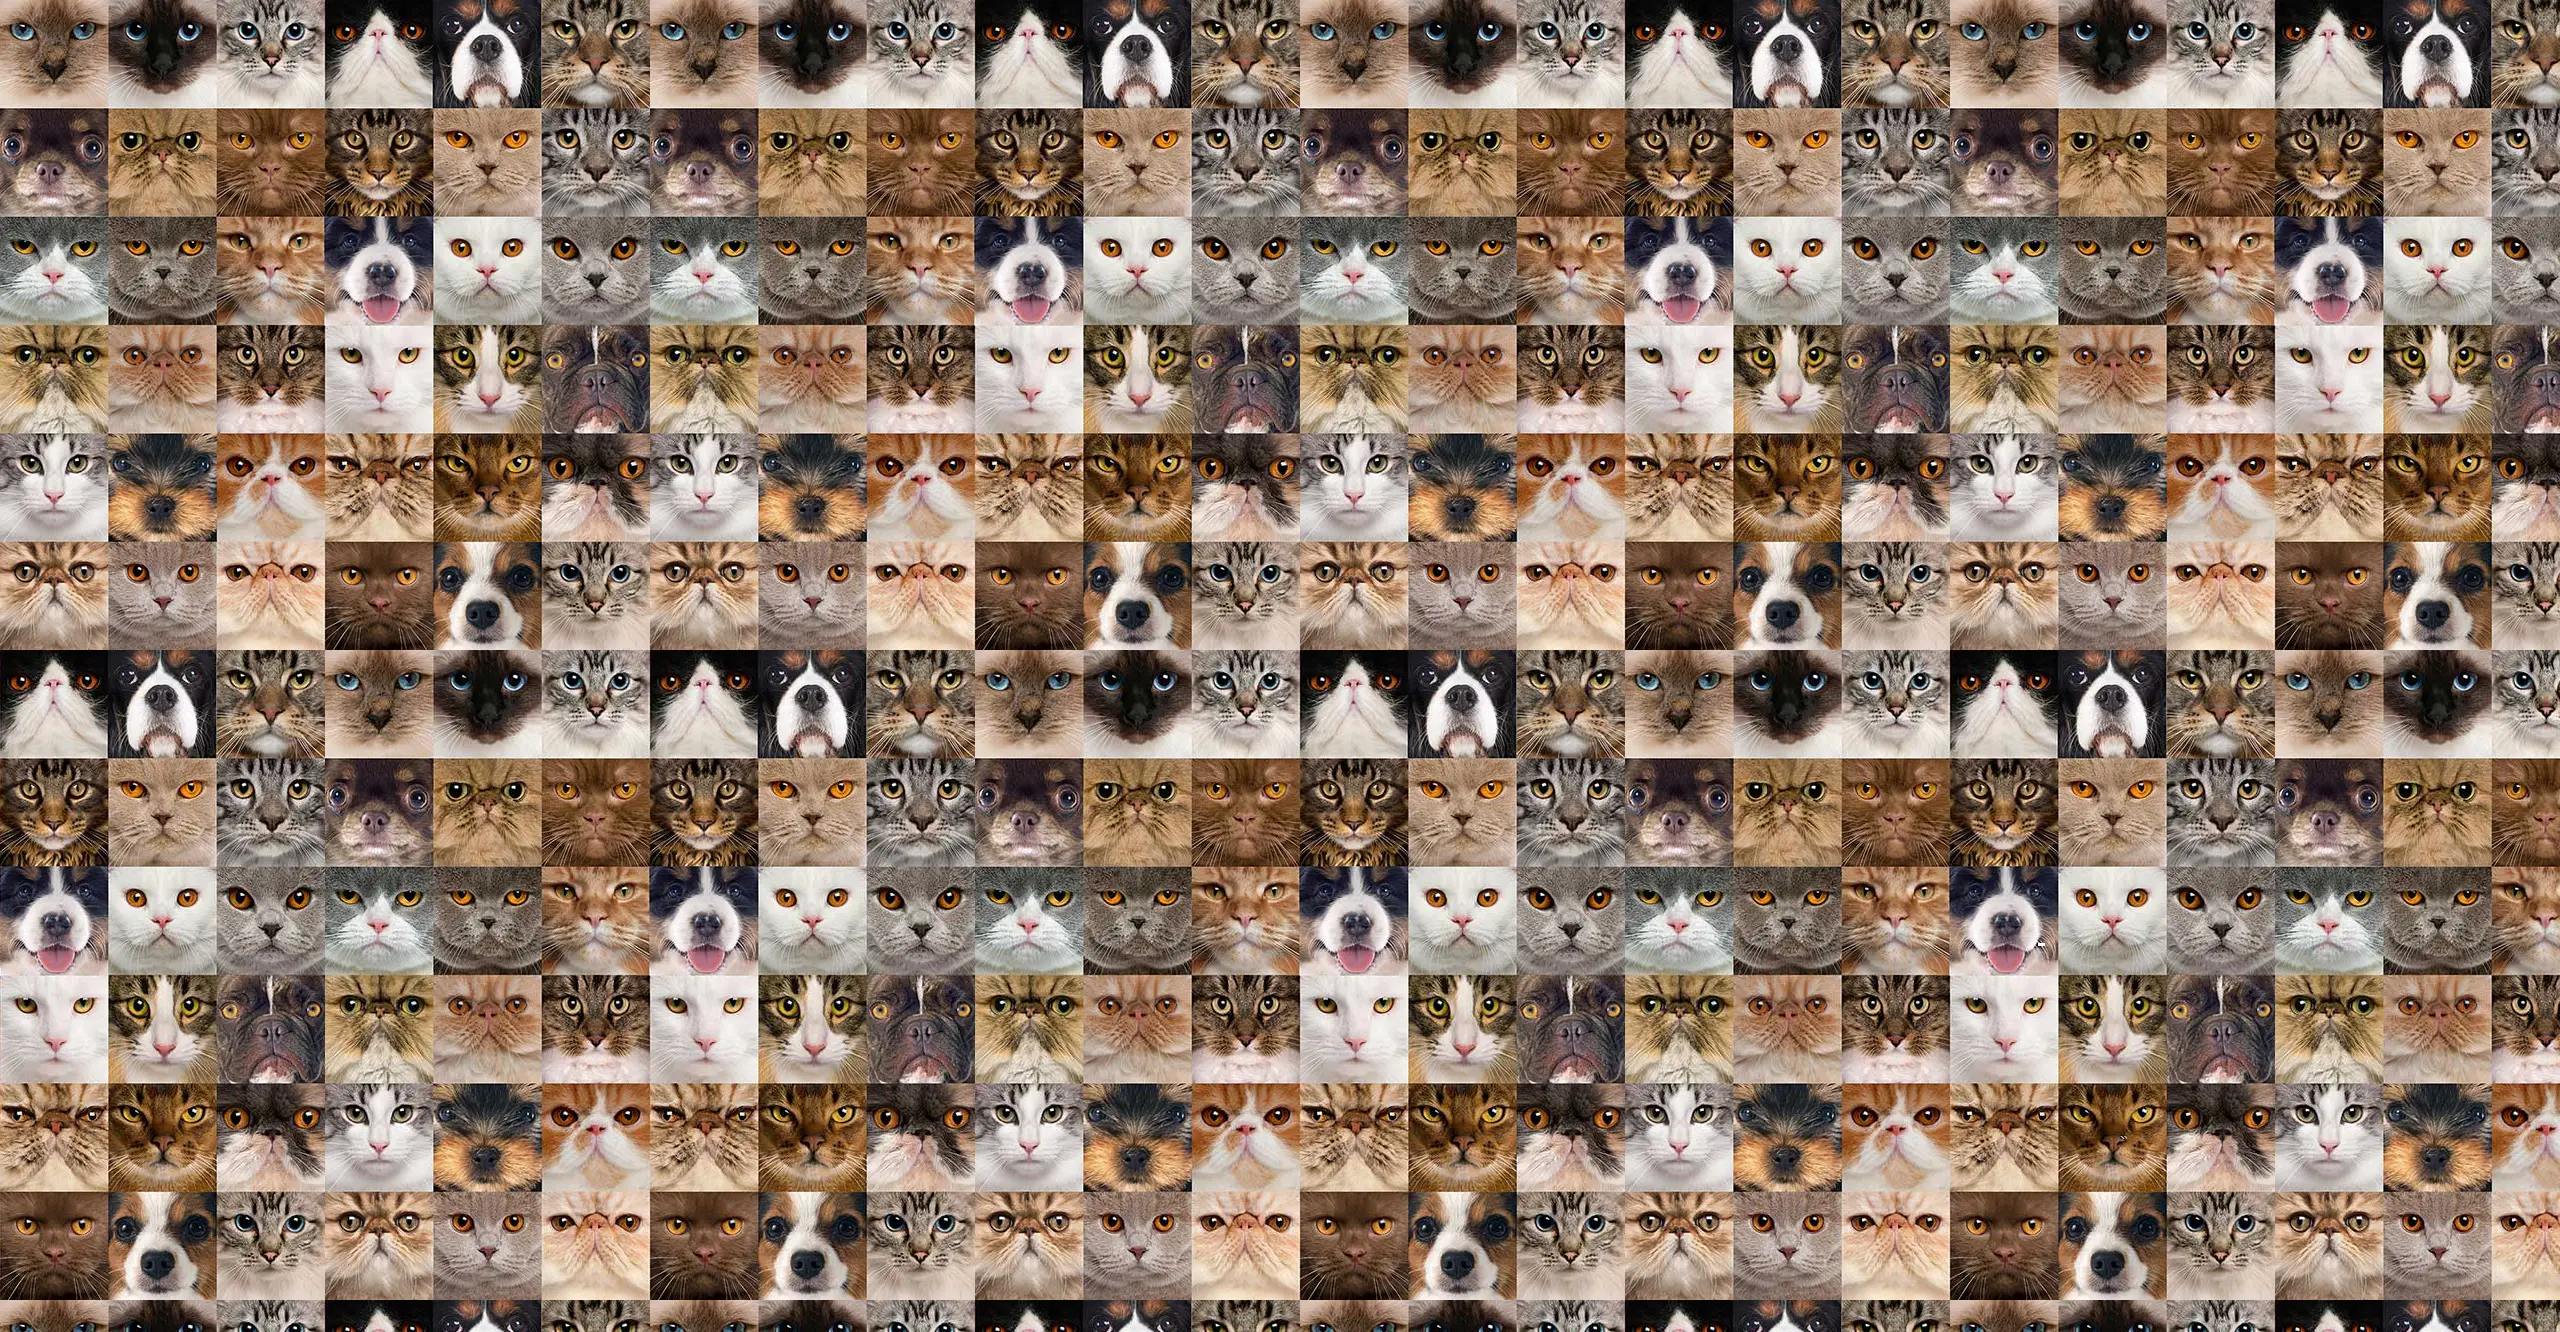 An image-grid of the faces of dogs and cats